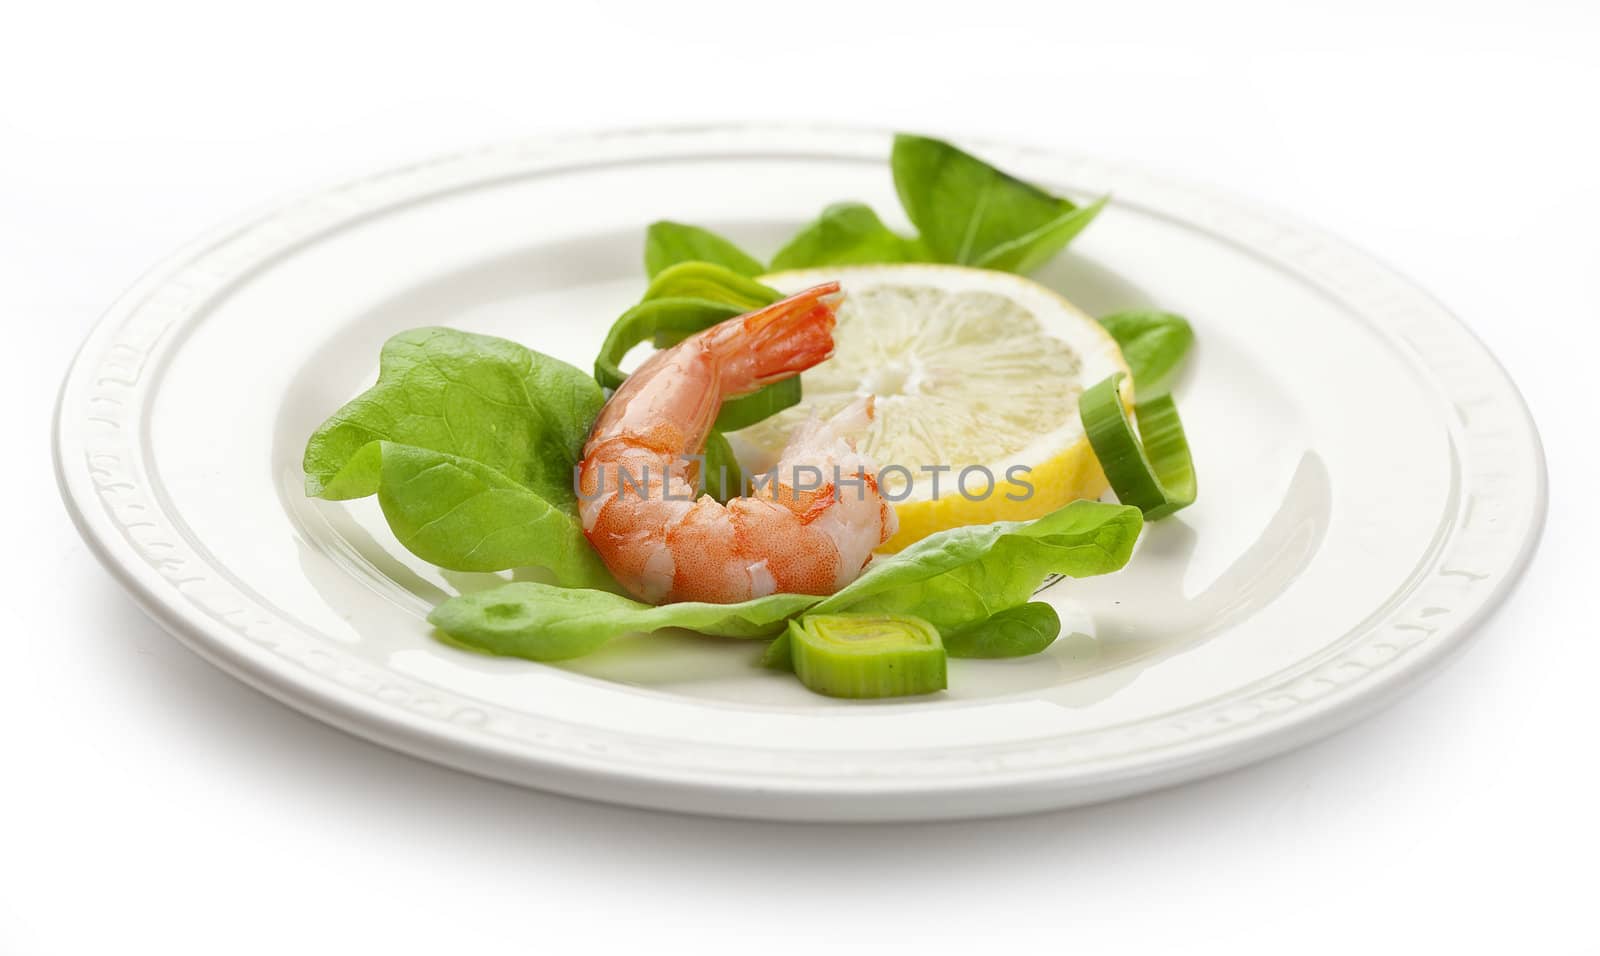 One shrimp's tail with lettuce, leek and lemon on the white plate